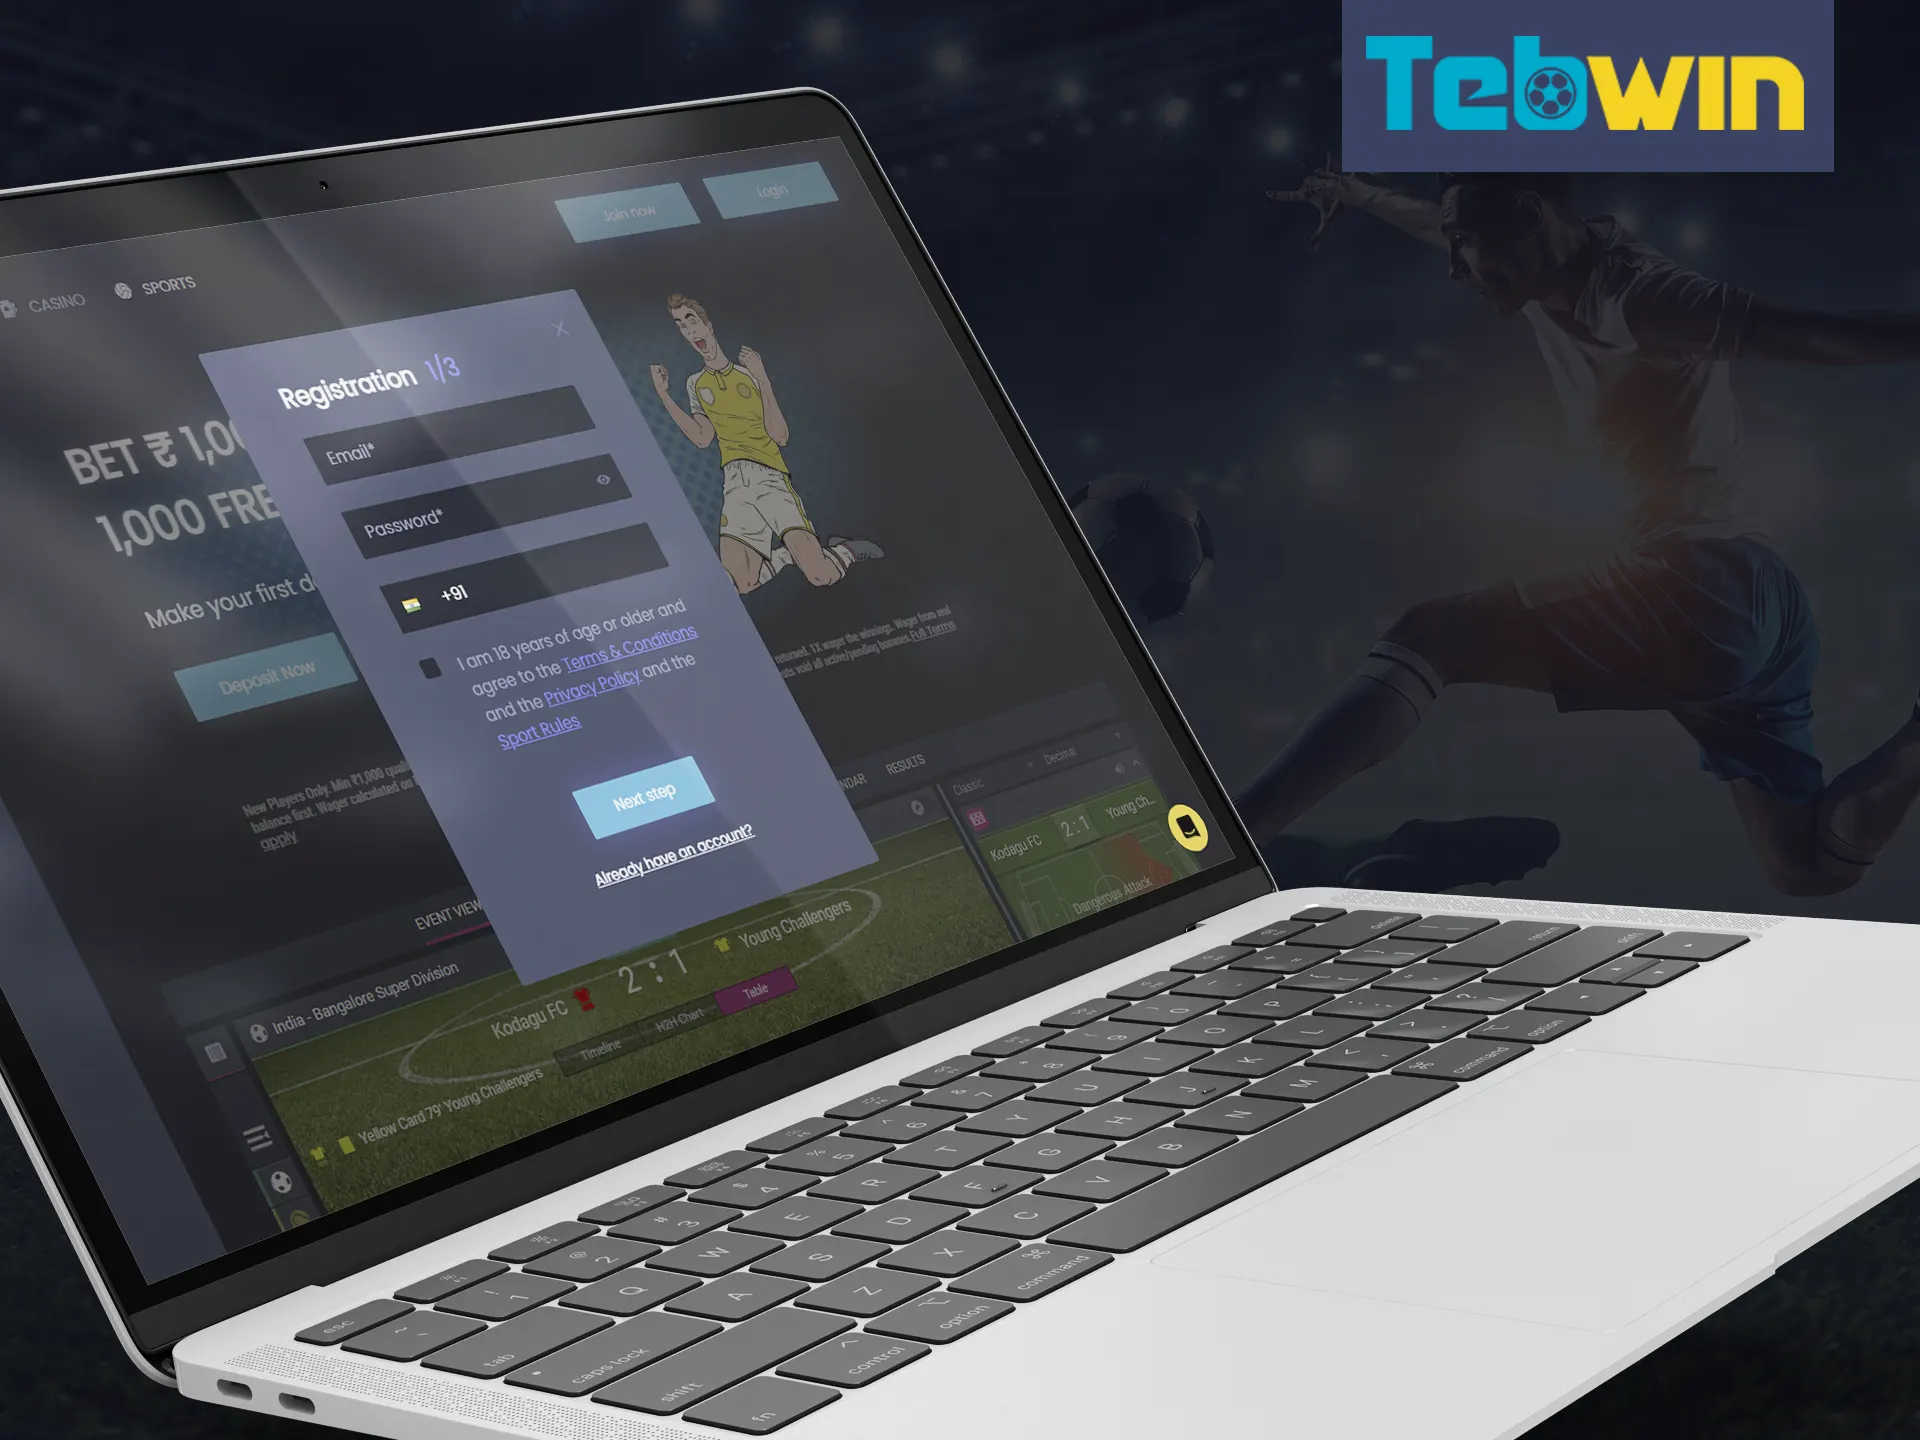 Go through the registration process at the Tebwin online casino site.